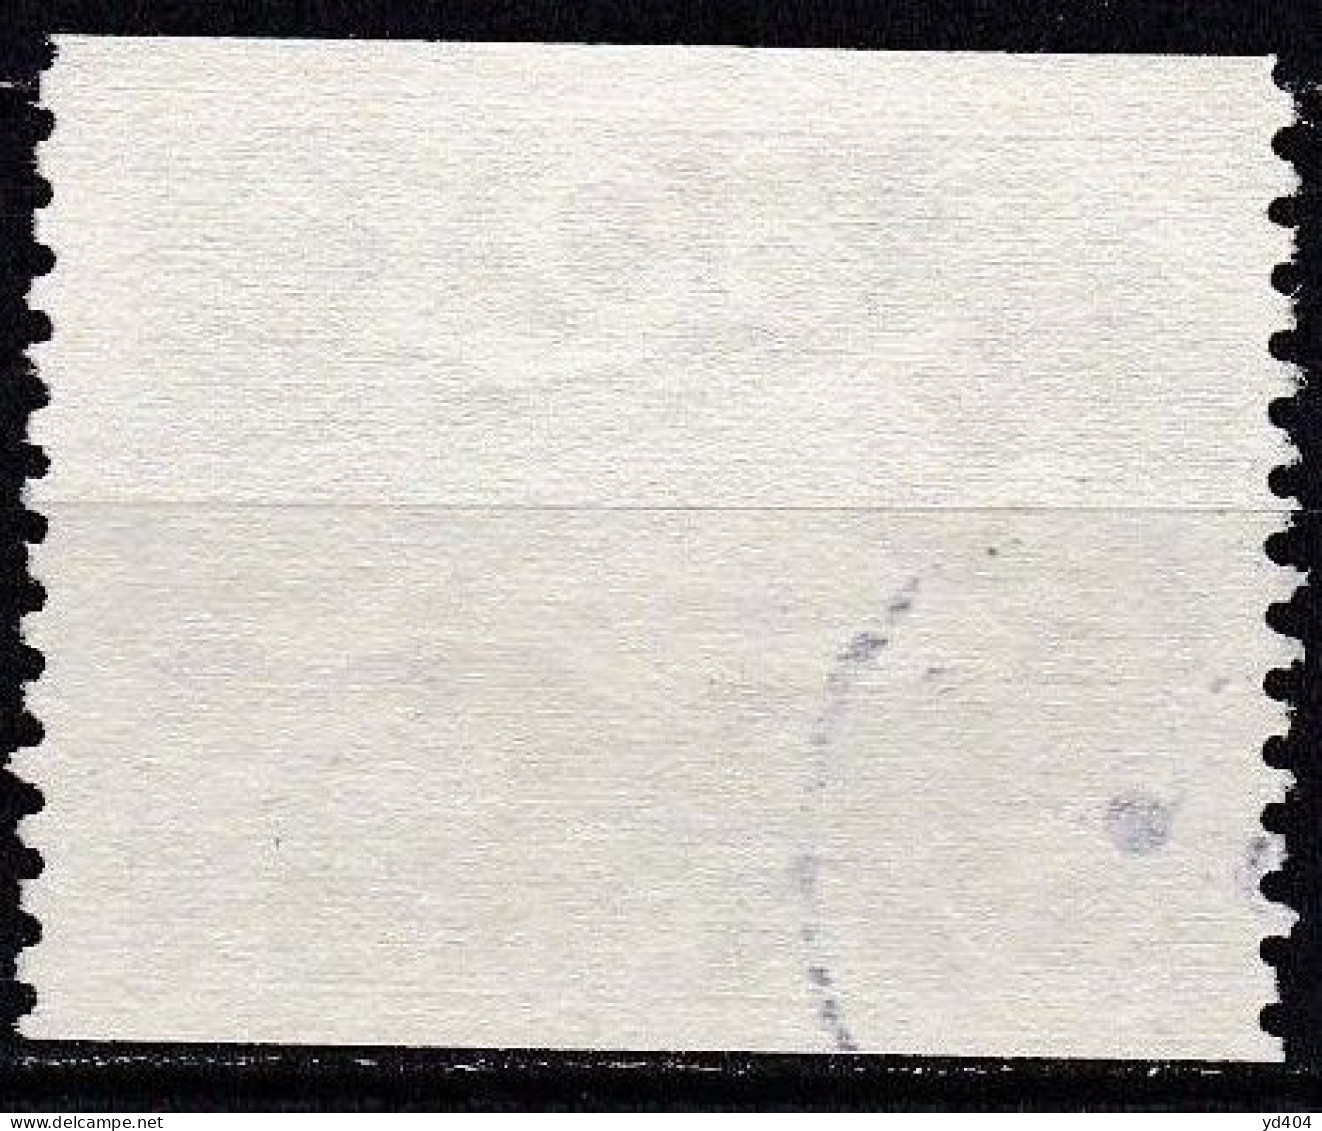 SE609 – SUEDE – SWEDEN – 1930-36 – NIGHT POSTAL SERVICE & BROMMA AIRPORT – Y&T 4/6 USED 11,75 € - Usati